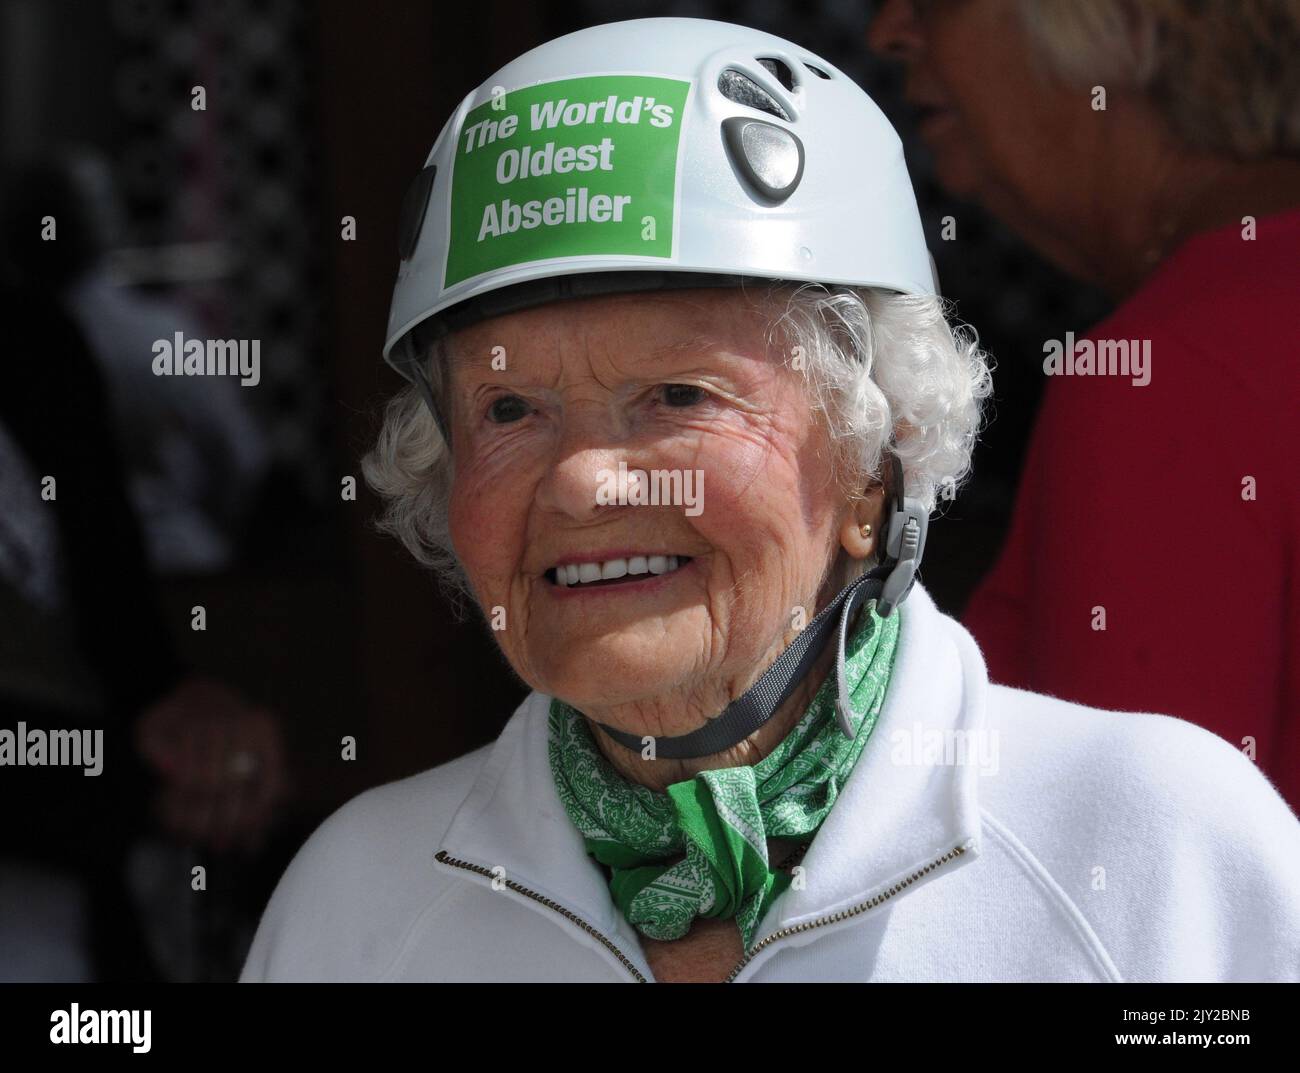 99 YEAR OLD DORIS LONG COMPLETES HER ABSEIL DOWN THE 330 FOOT SPINNAKER TOWER AT PORTSMOUTH TO RAISE MONEY FOR THE ROWENS HOSPICE. PIC MIKE WALKER, MIKE WALKER PICTURES,2013 Stock Photo